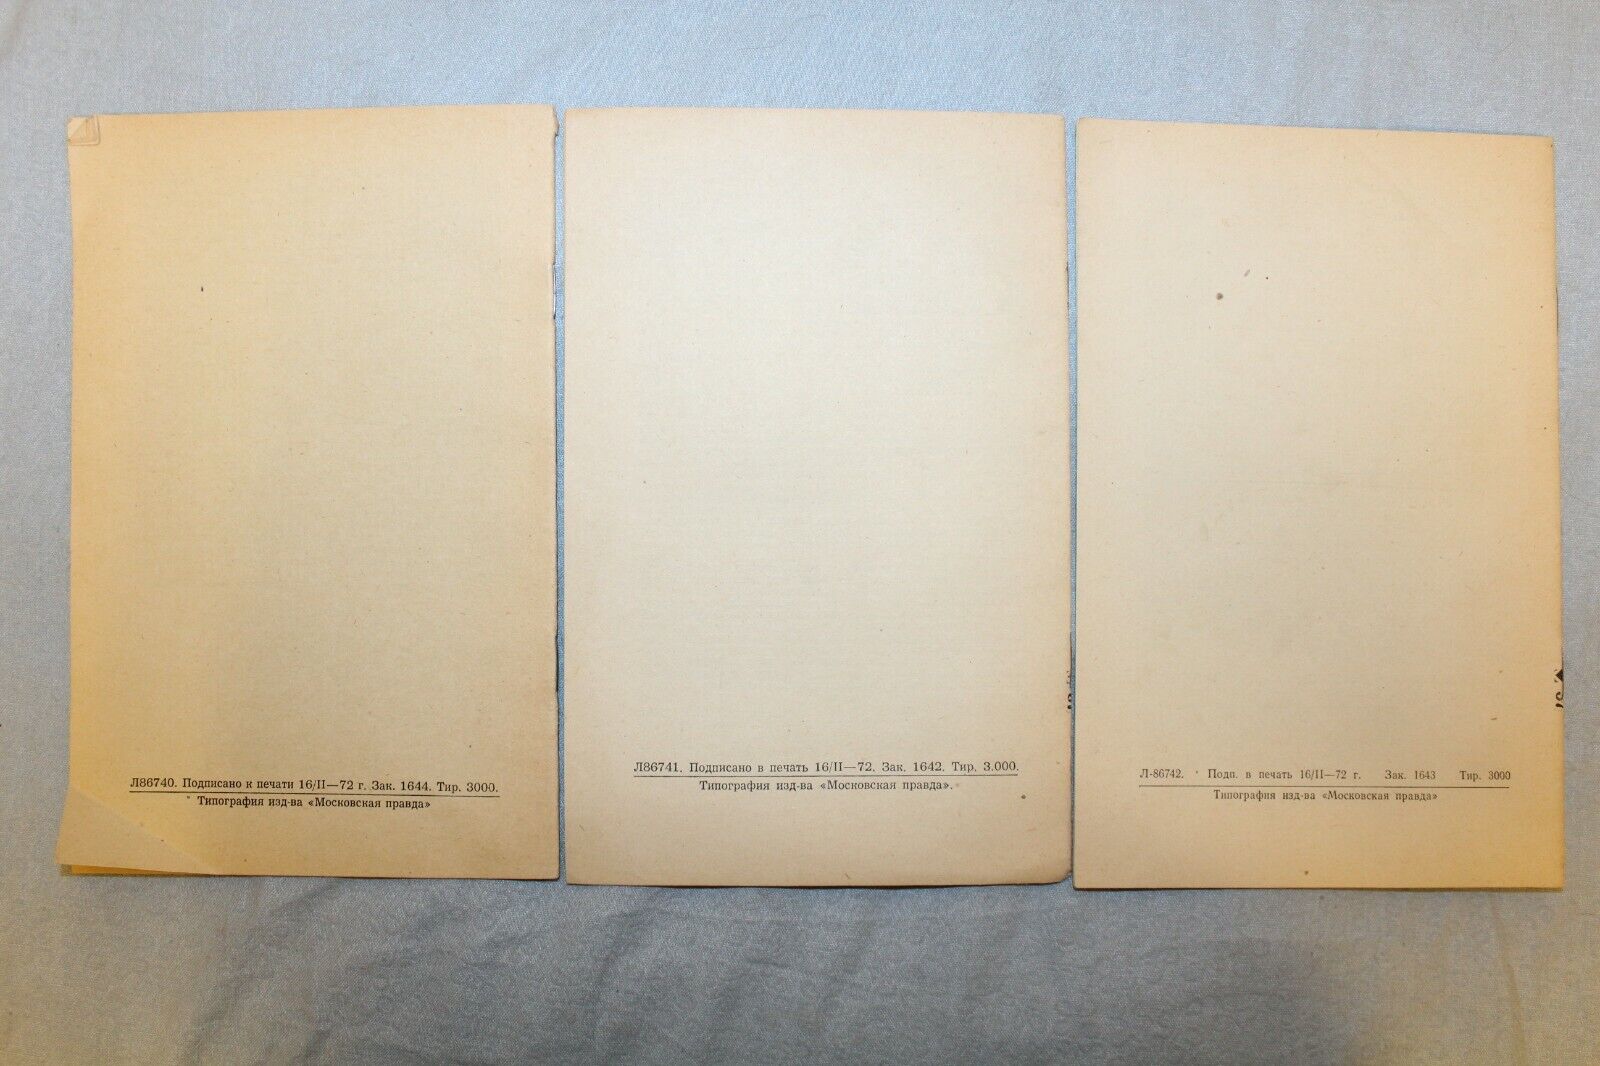 11646.Set of 3 Soviet Chess Methodical Instructions of Central Chess Club. USSR 1972